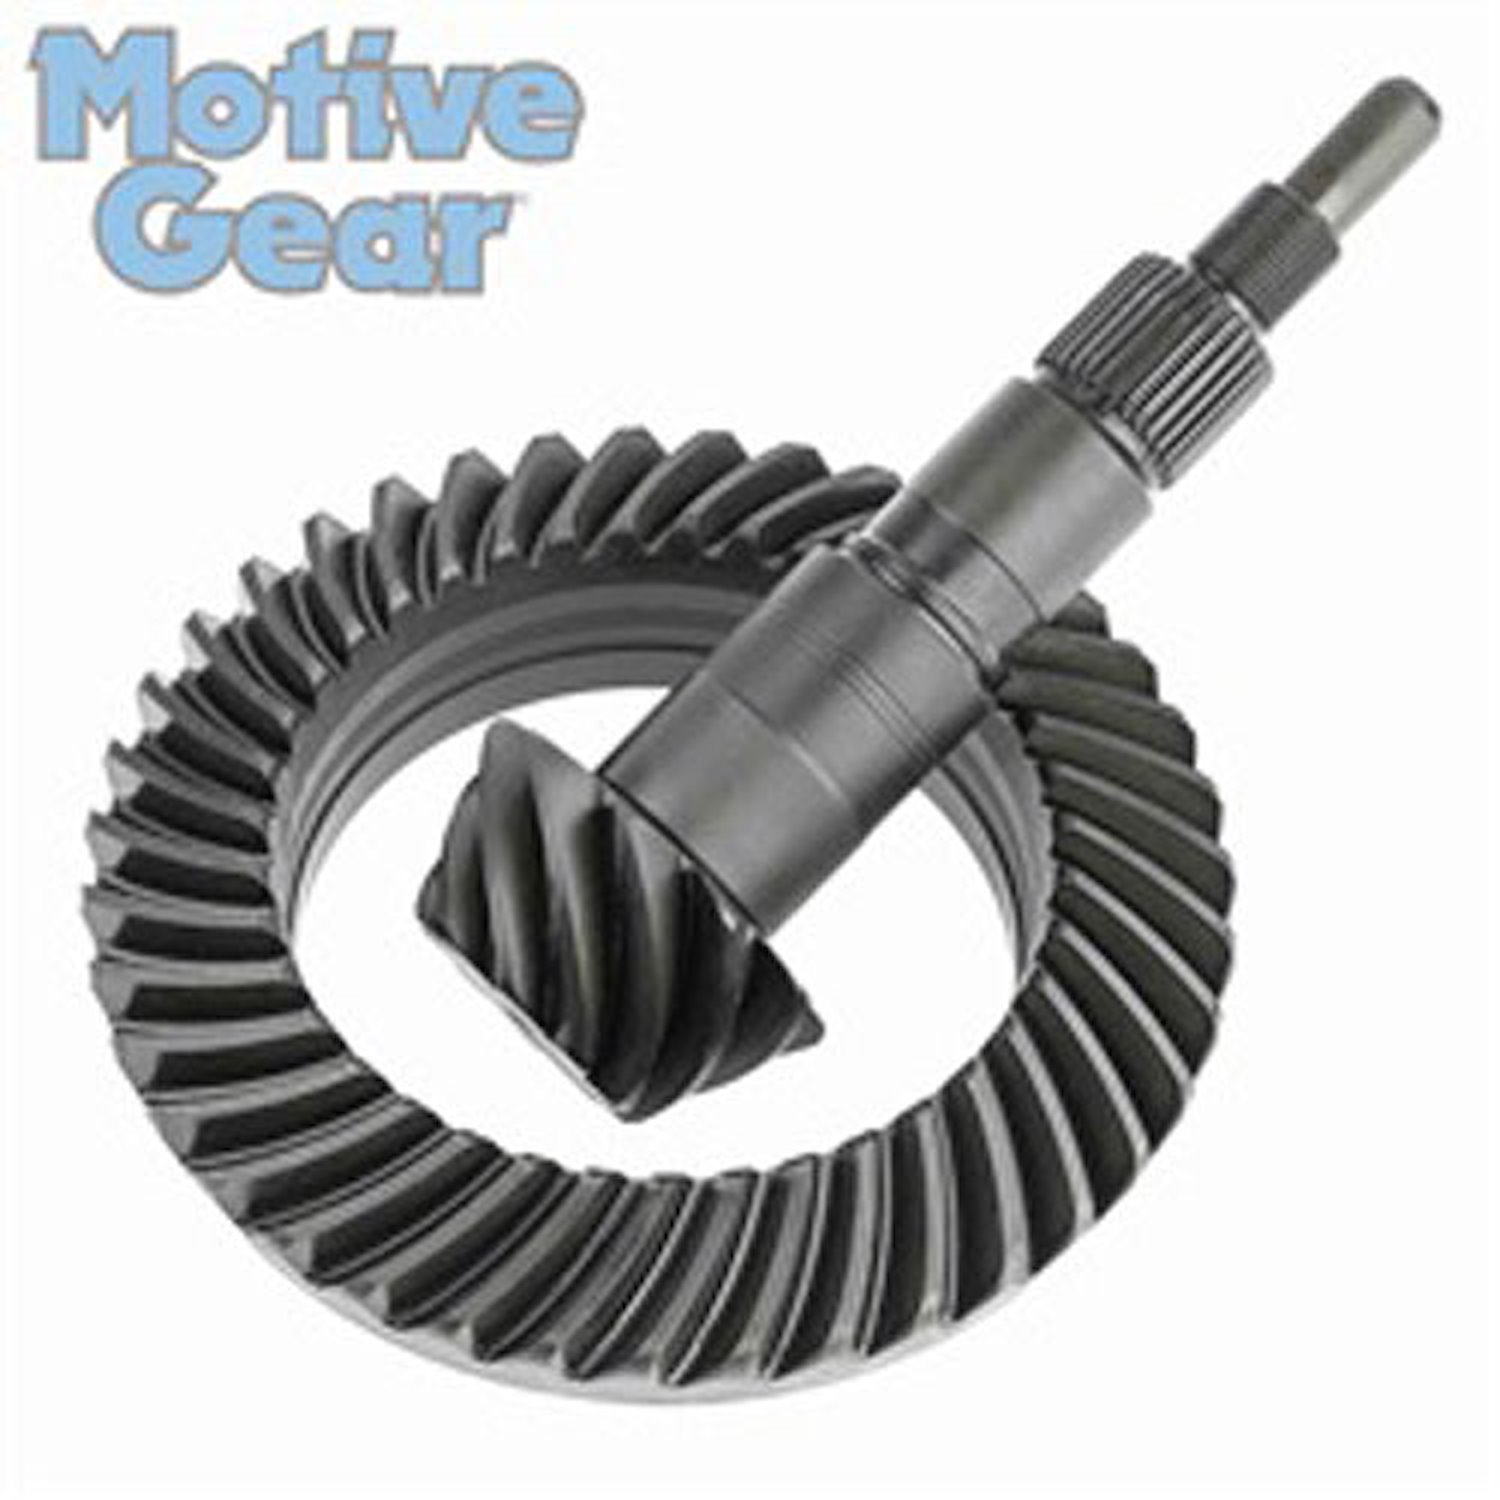 3.90 G8 RING AND PINION